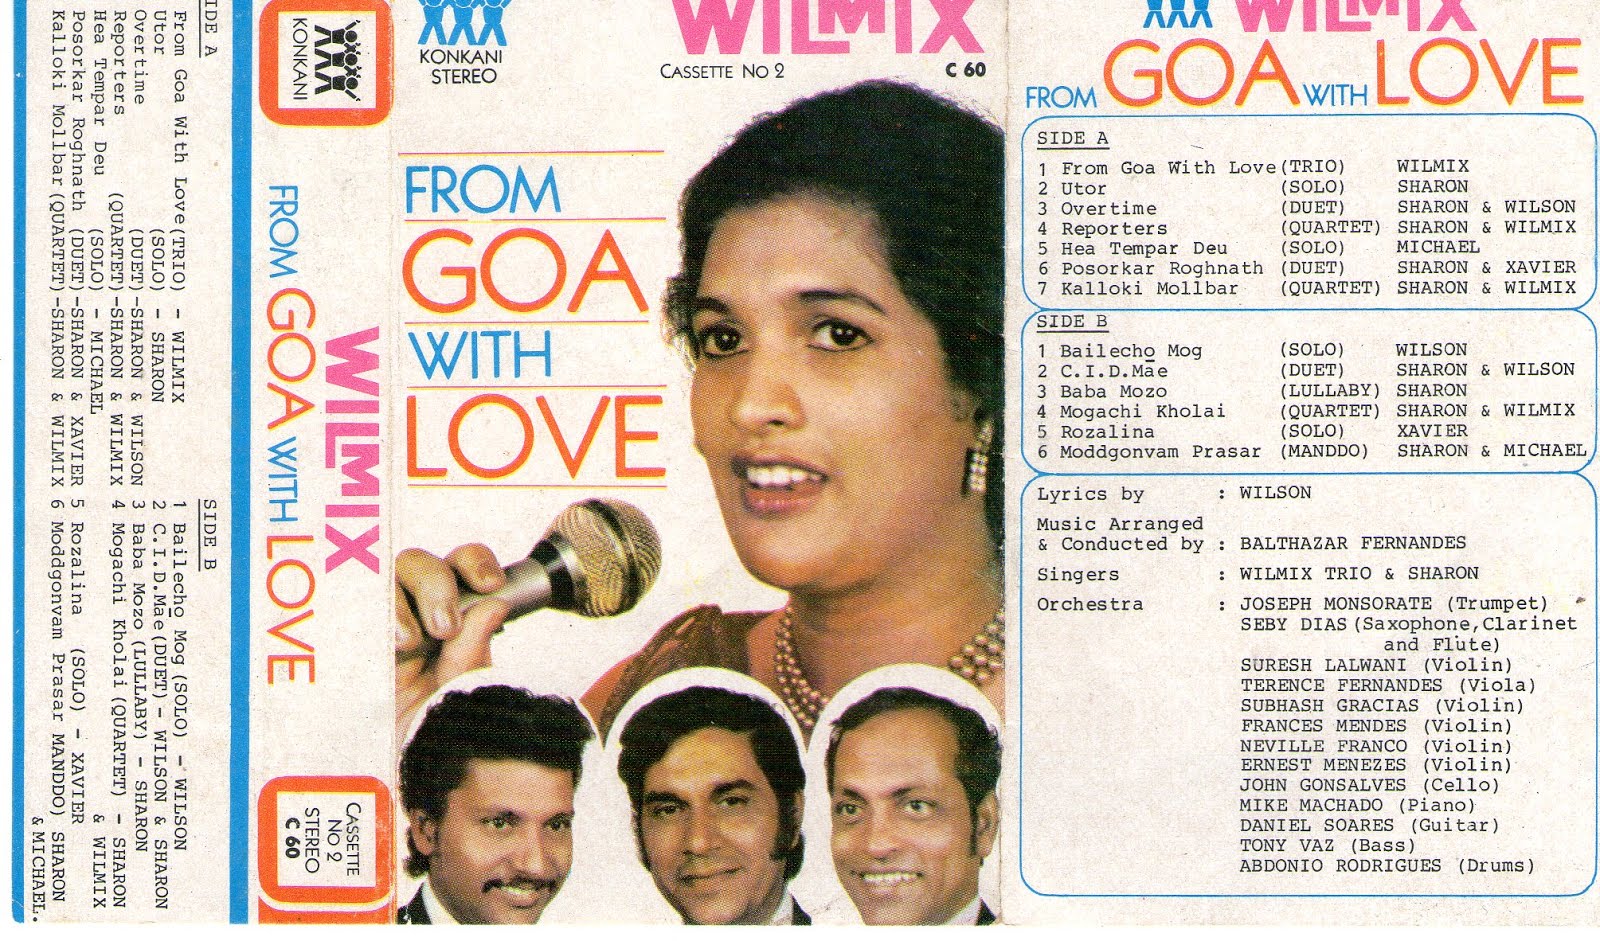 2. WILMIX ll - FROM GOA WITH LOVE - 1979